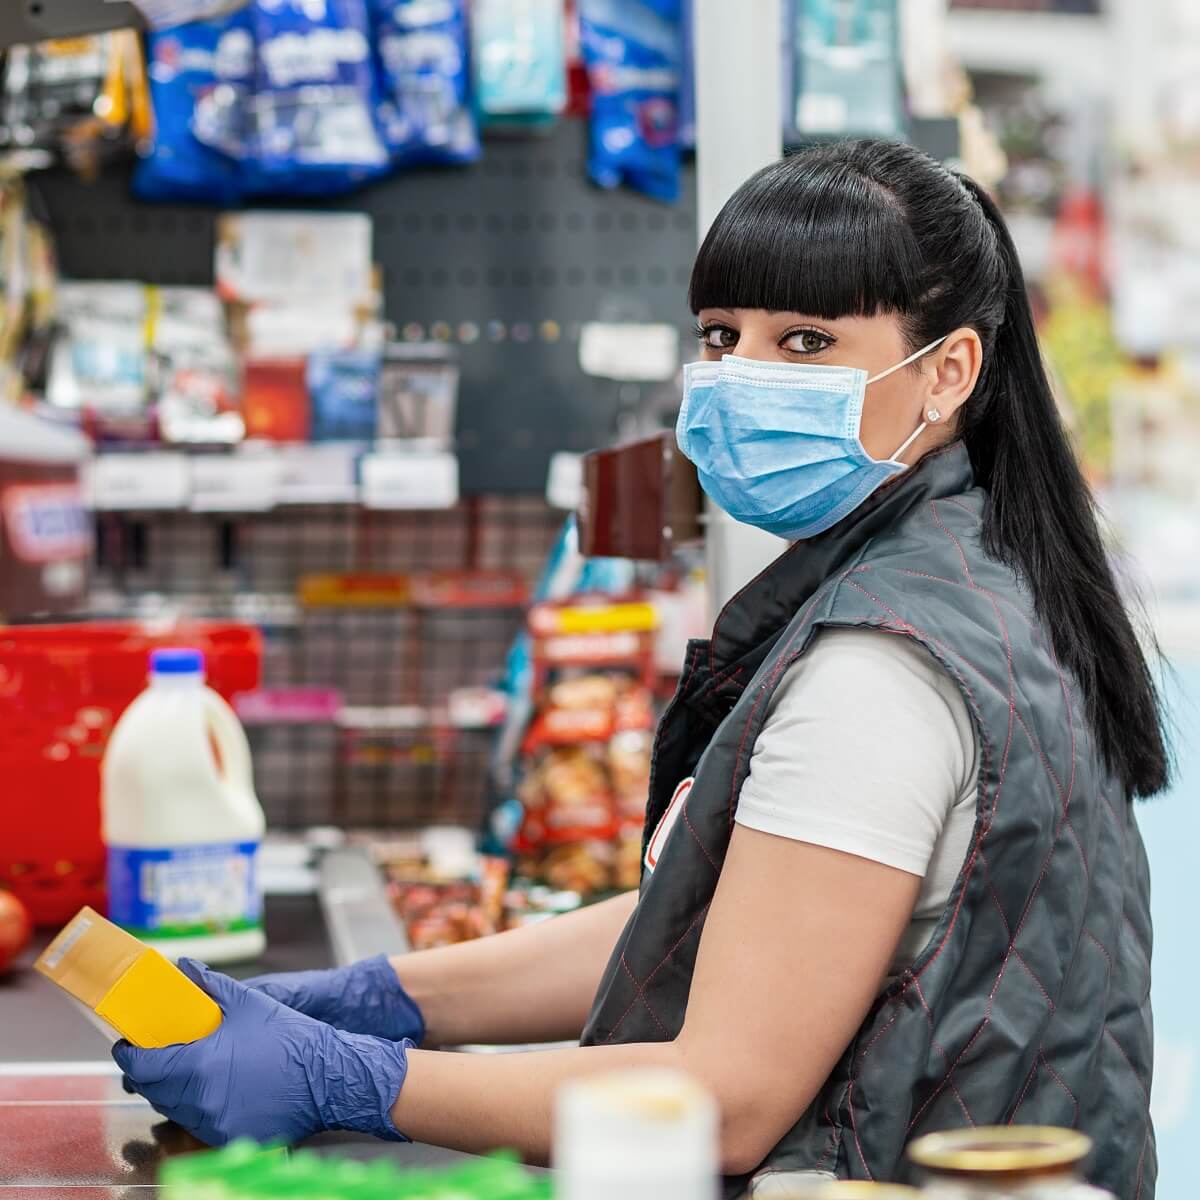 A cashier in a mask working at a store